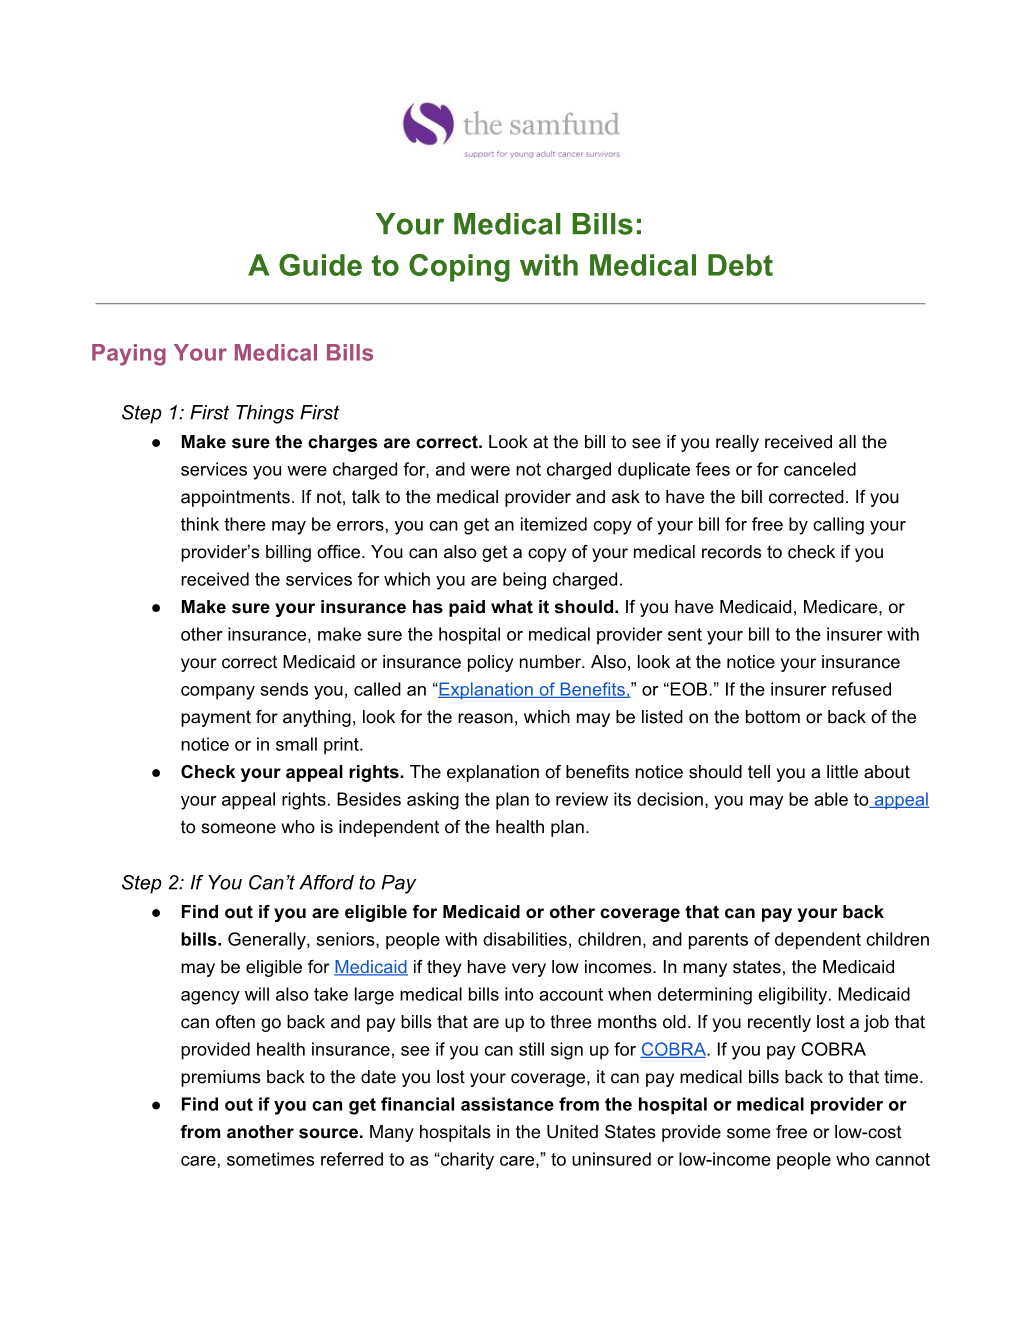 Your Medical Bills: a Guide to Coping with Medical Debt